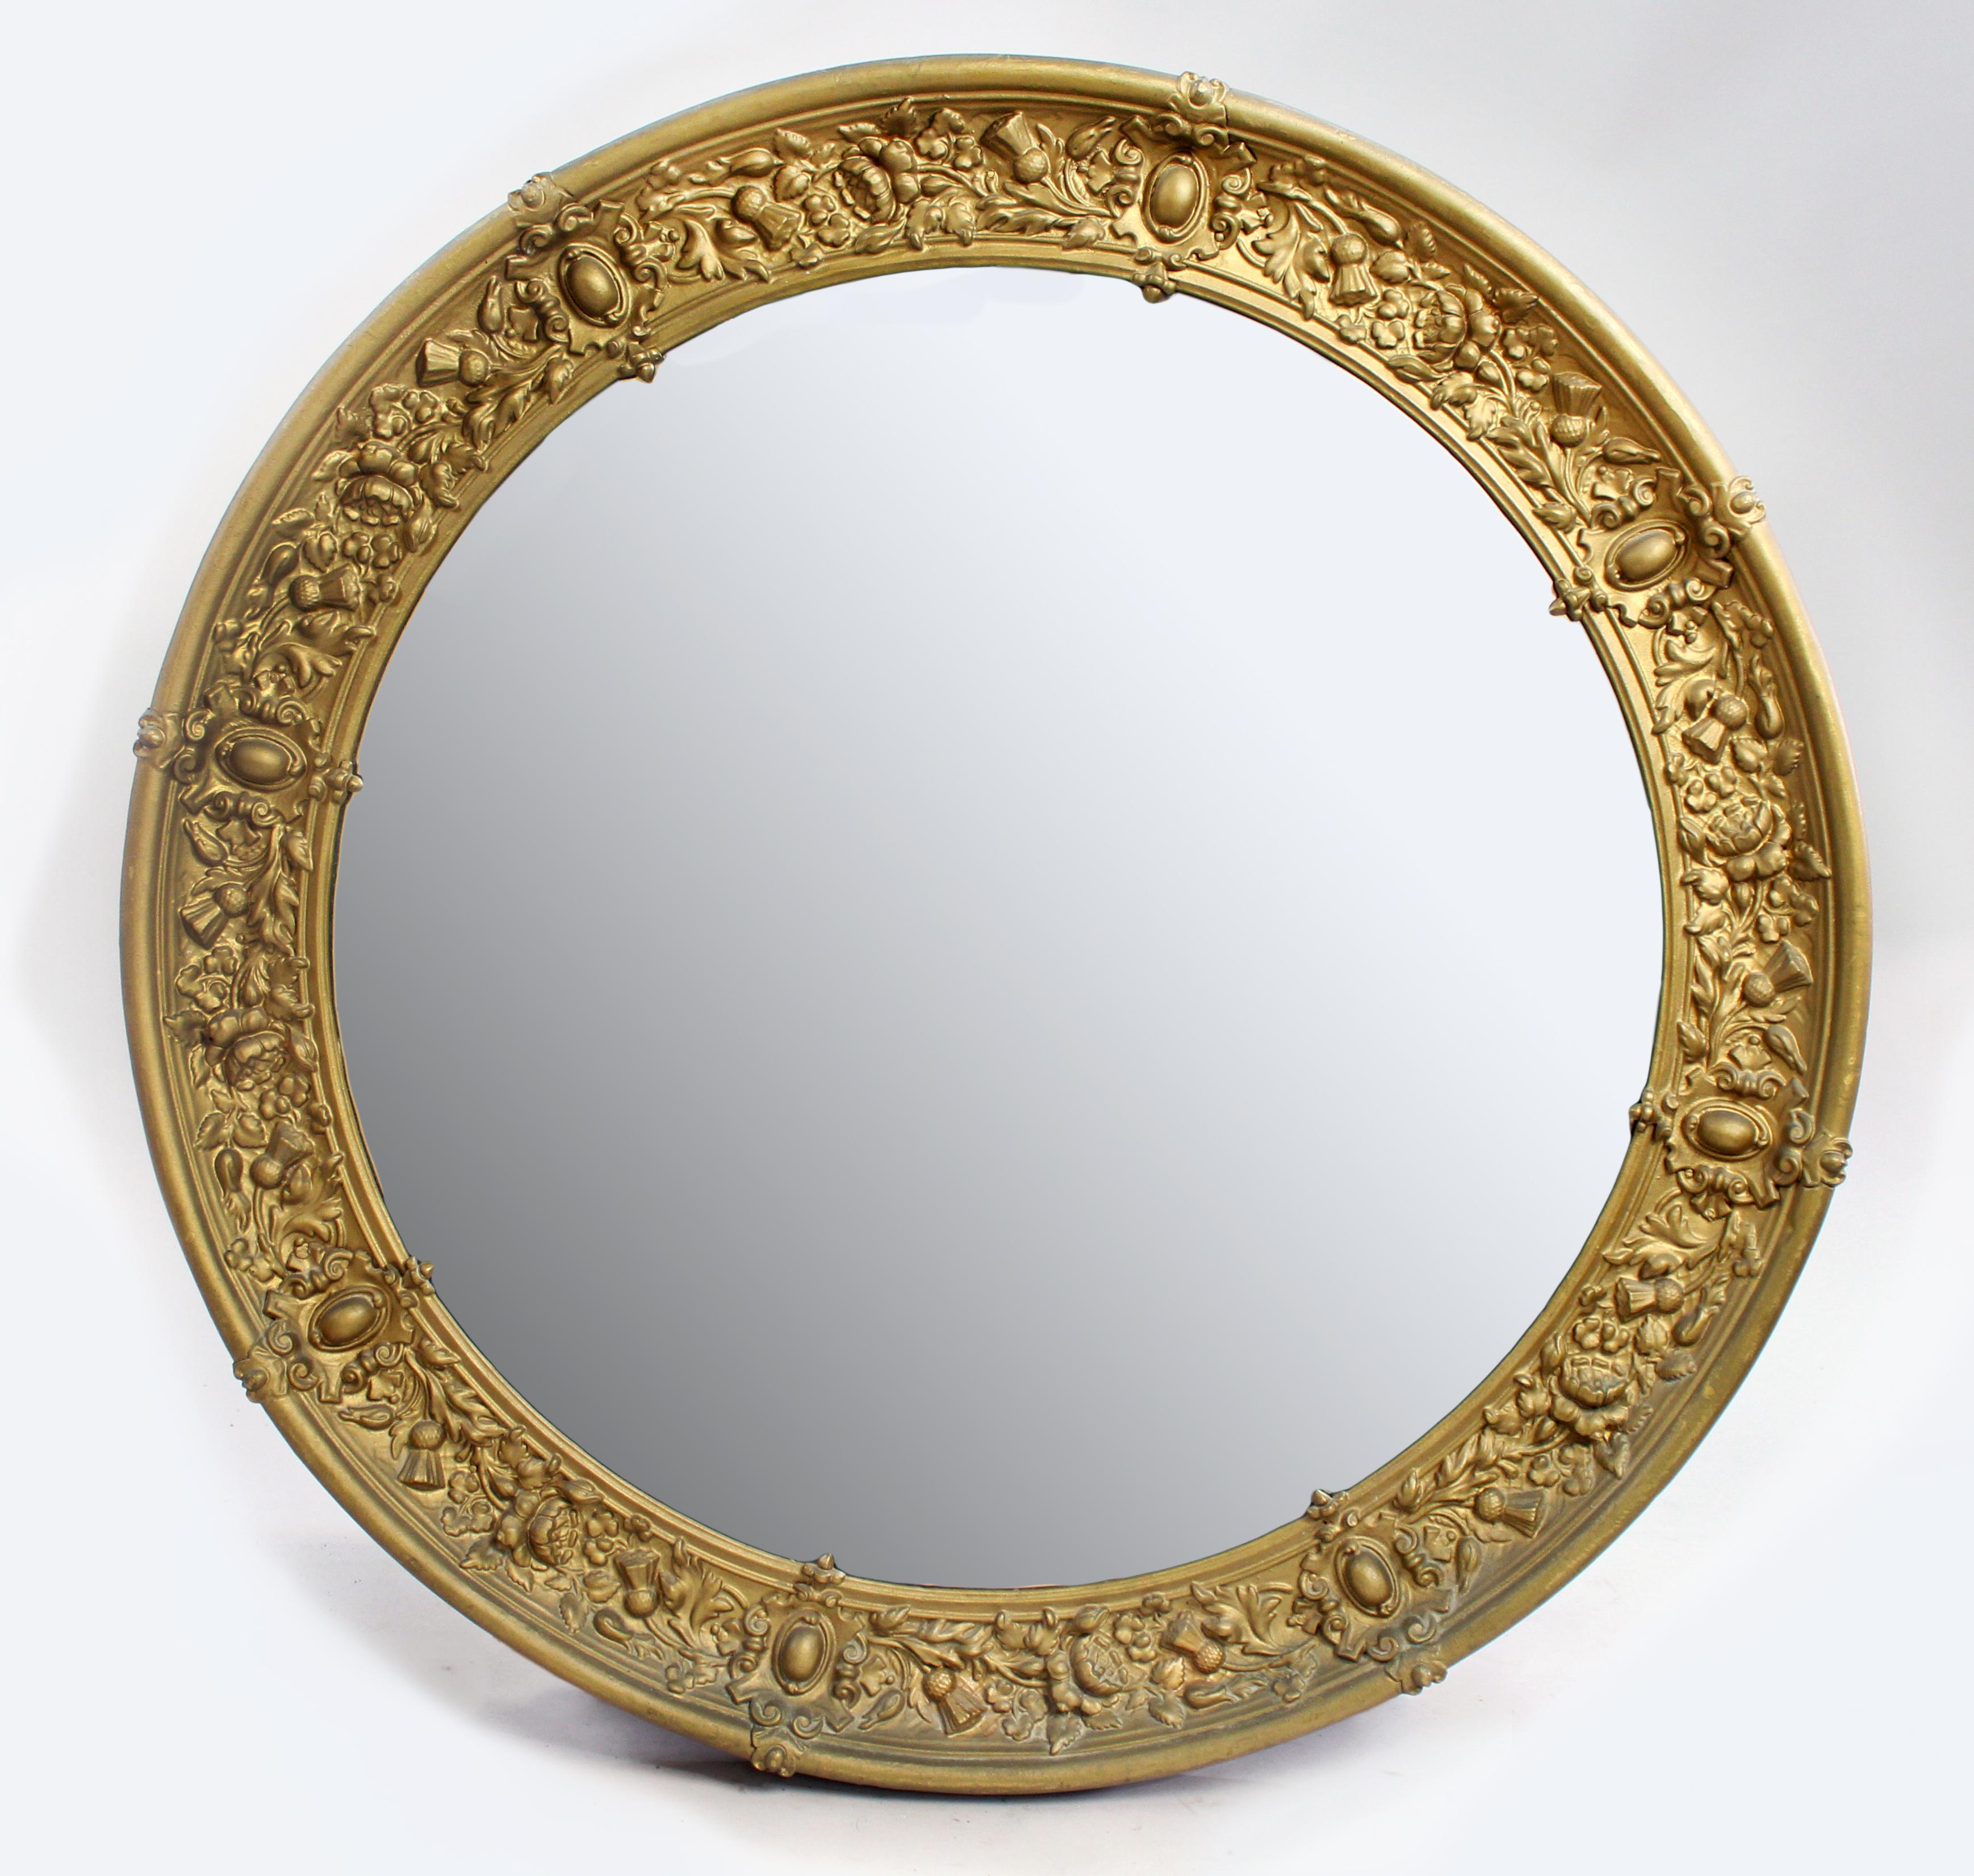 French 19th c. gilt brass 3ft circular mirror


Measures: Diameter: 91 cm 36 in

Depth: 6 cm 2 1/4

 
Period Late 19th c., French, c.1880

Frame decorative gilt brass cased frame, gilt finish

Mirror original bevelled glass

Condition